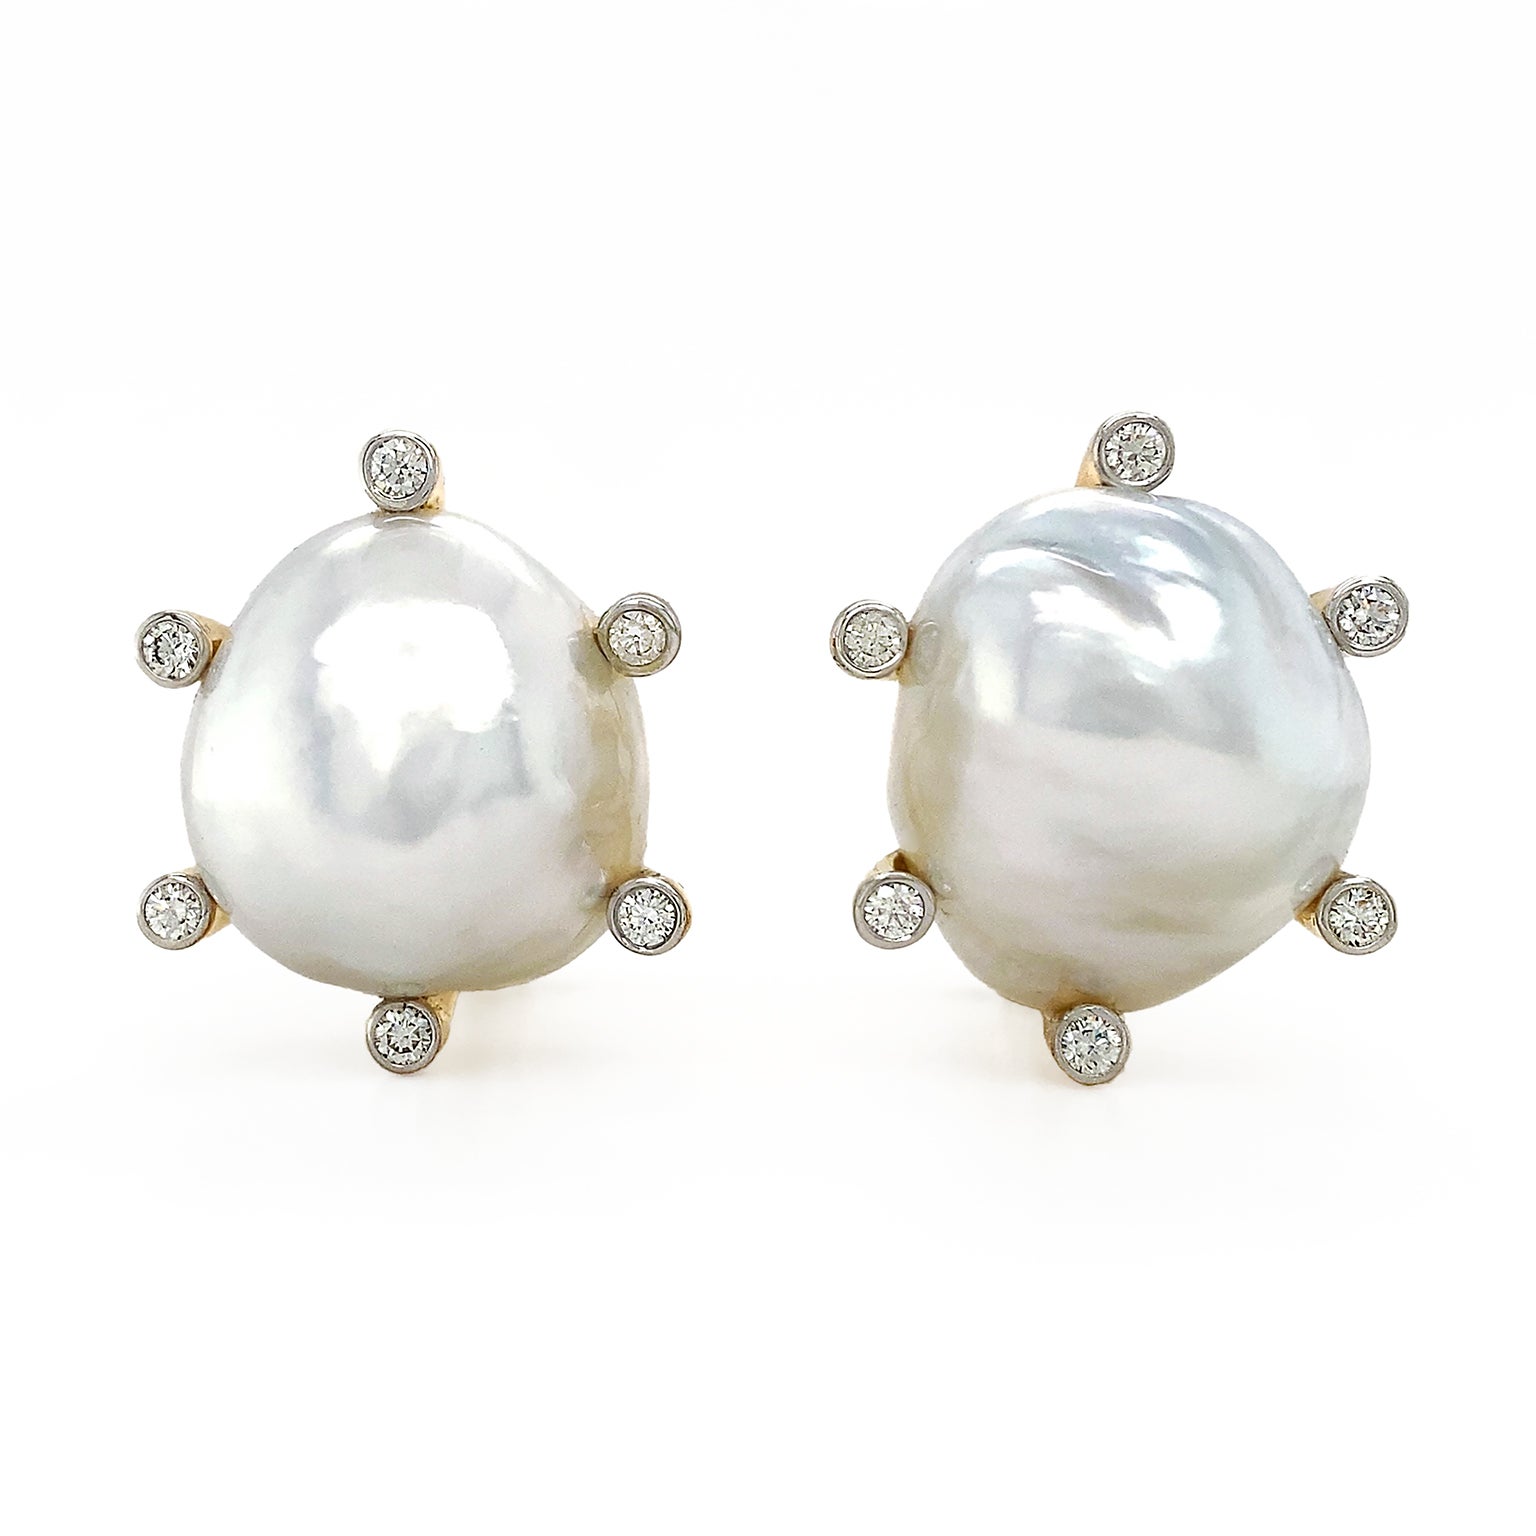 A polychromatic glow is created by these earrings. At the center is a single white baroque pearl, capturing depth and reflecting an array of light. 18k yellow gold prongs adorned with brilliant cut diamonds secure the pearl. The diamonds produce